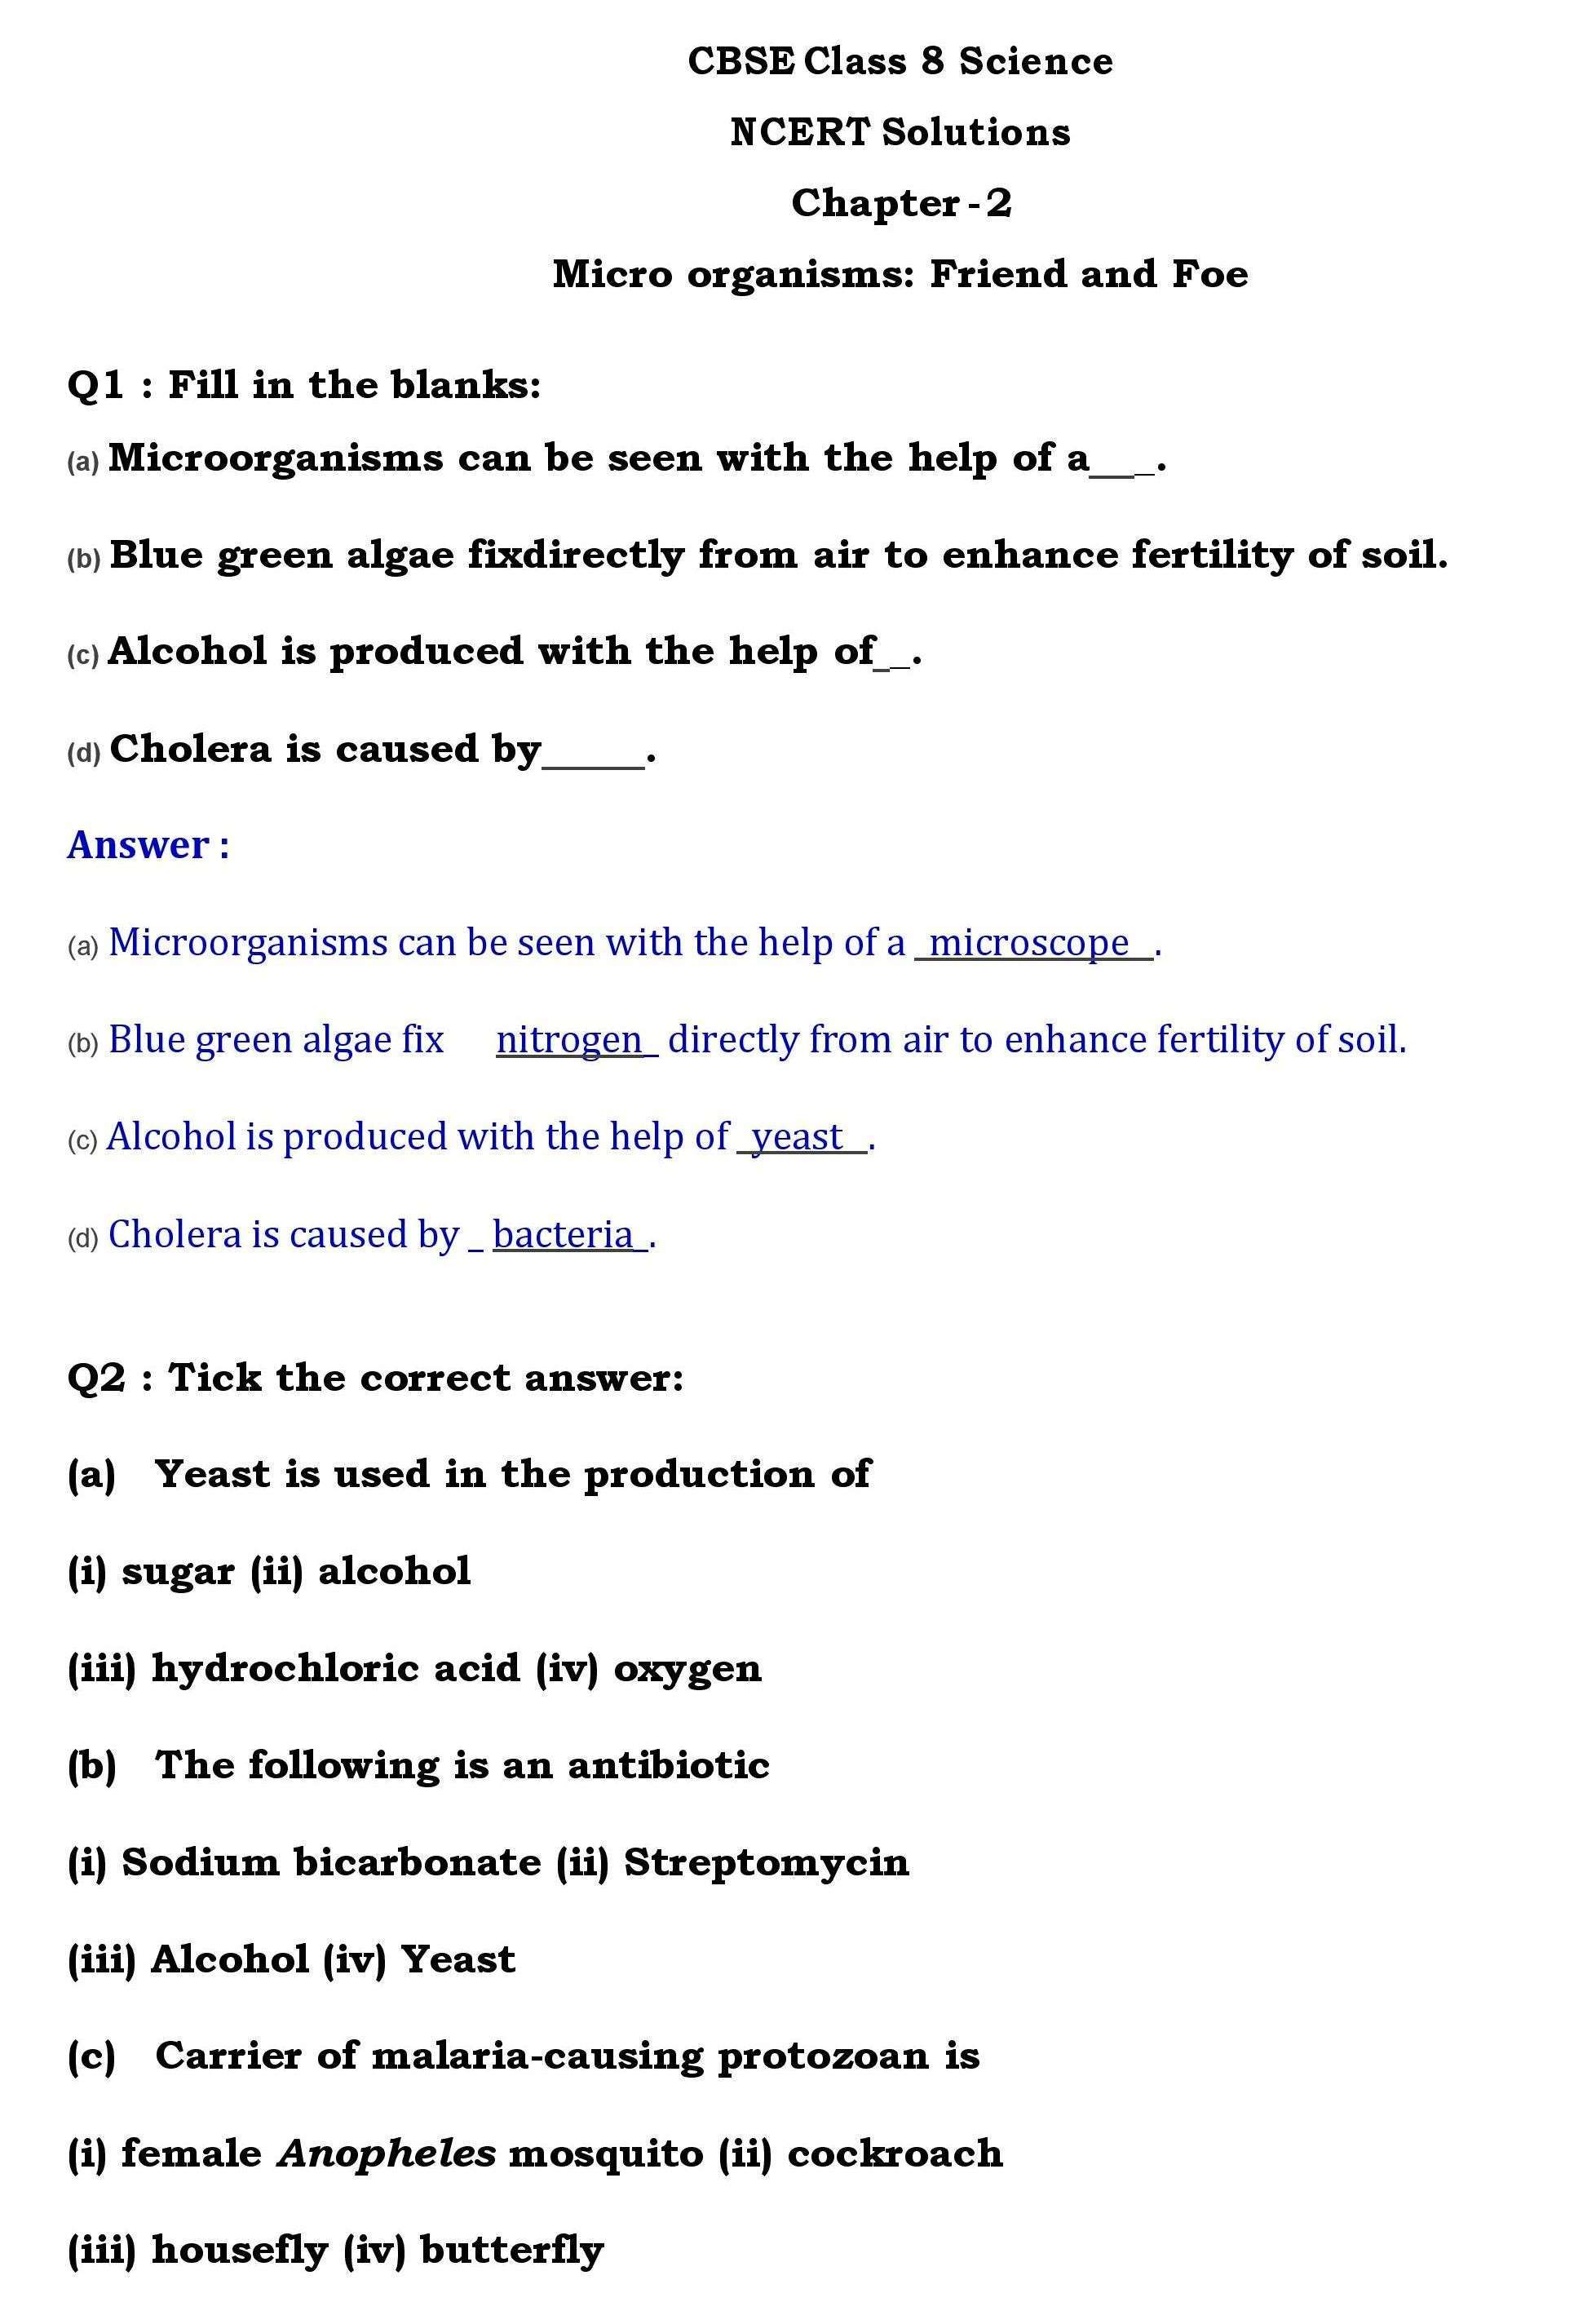 NCERT Solutions for Class 8 Science Chapter 2 page 001